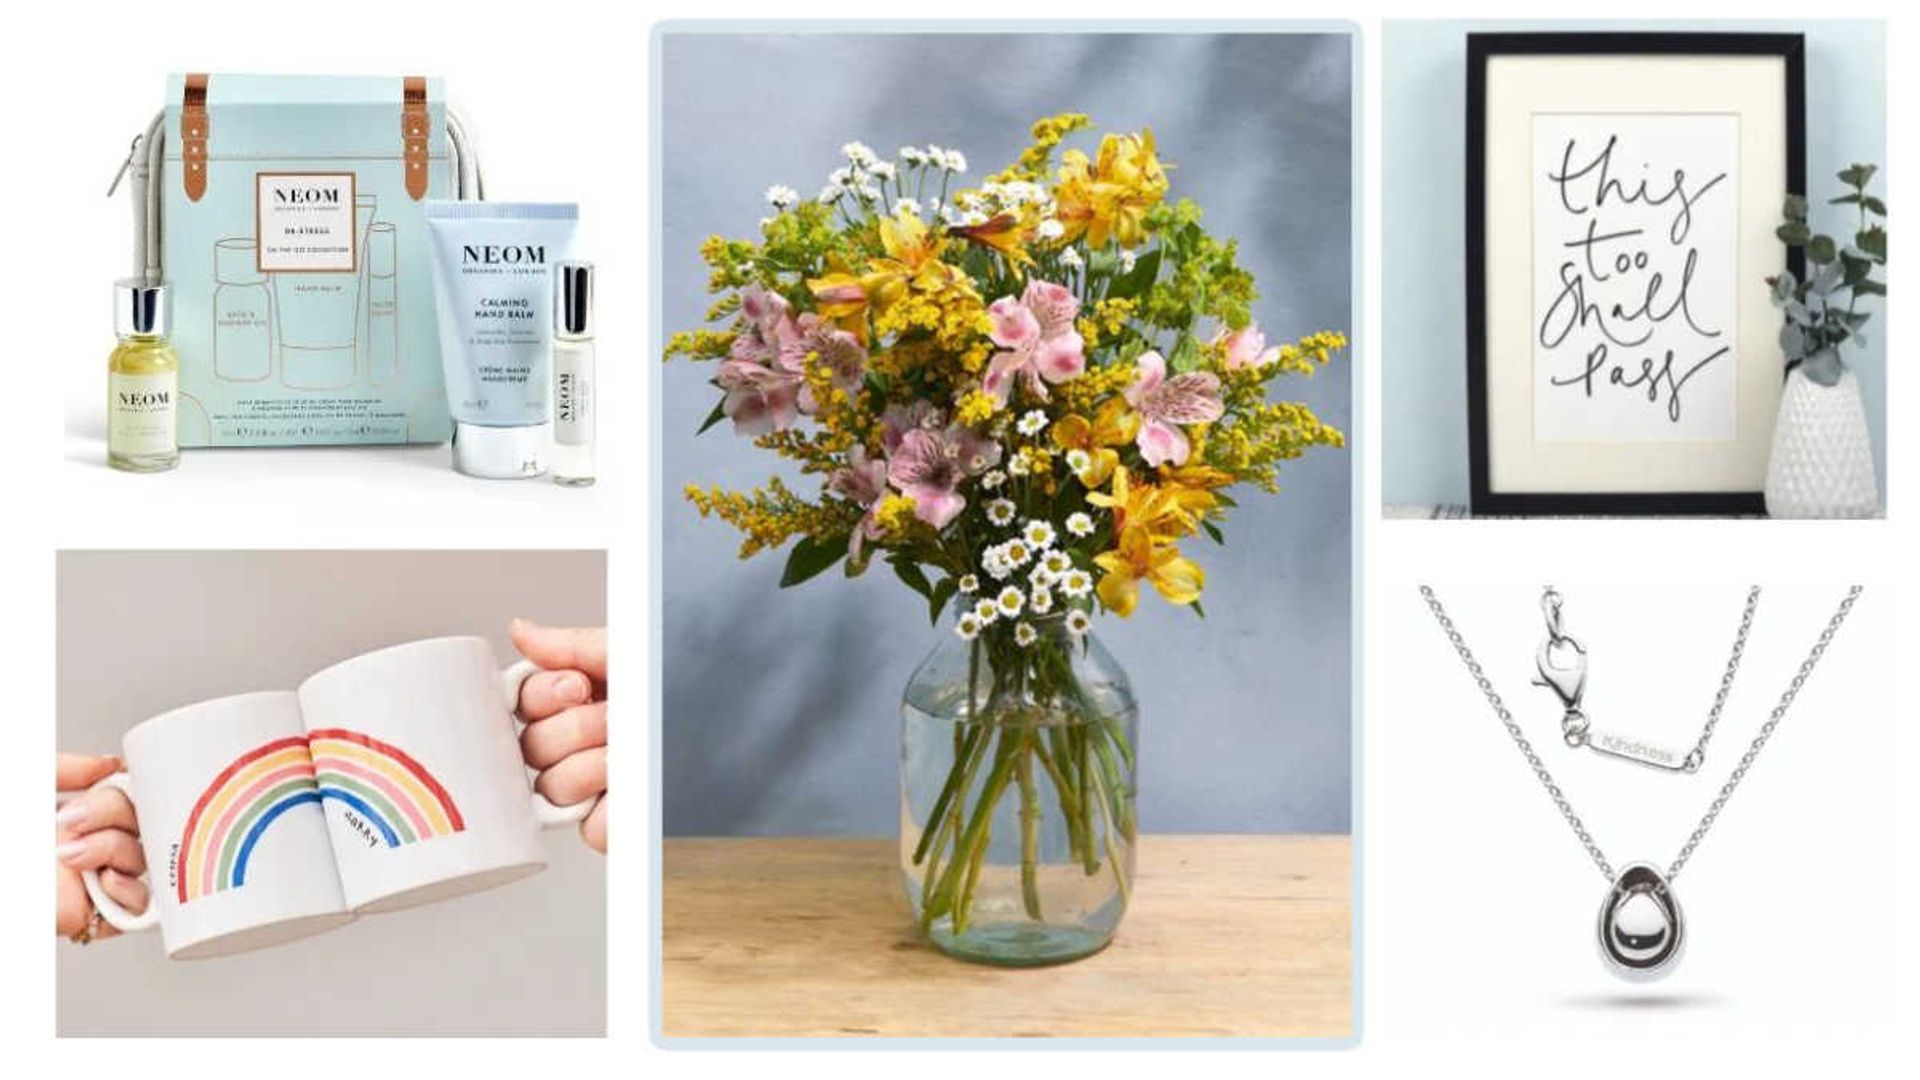 Thinking of you: 23 best thoughtful gifts to show you care